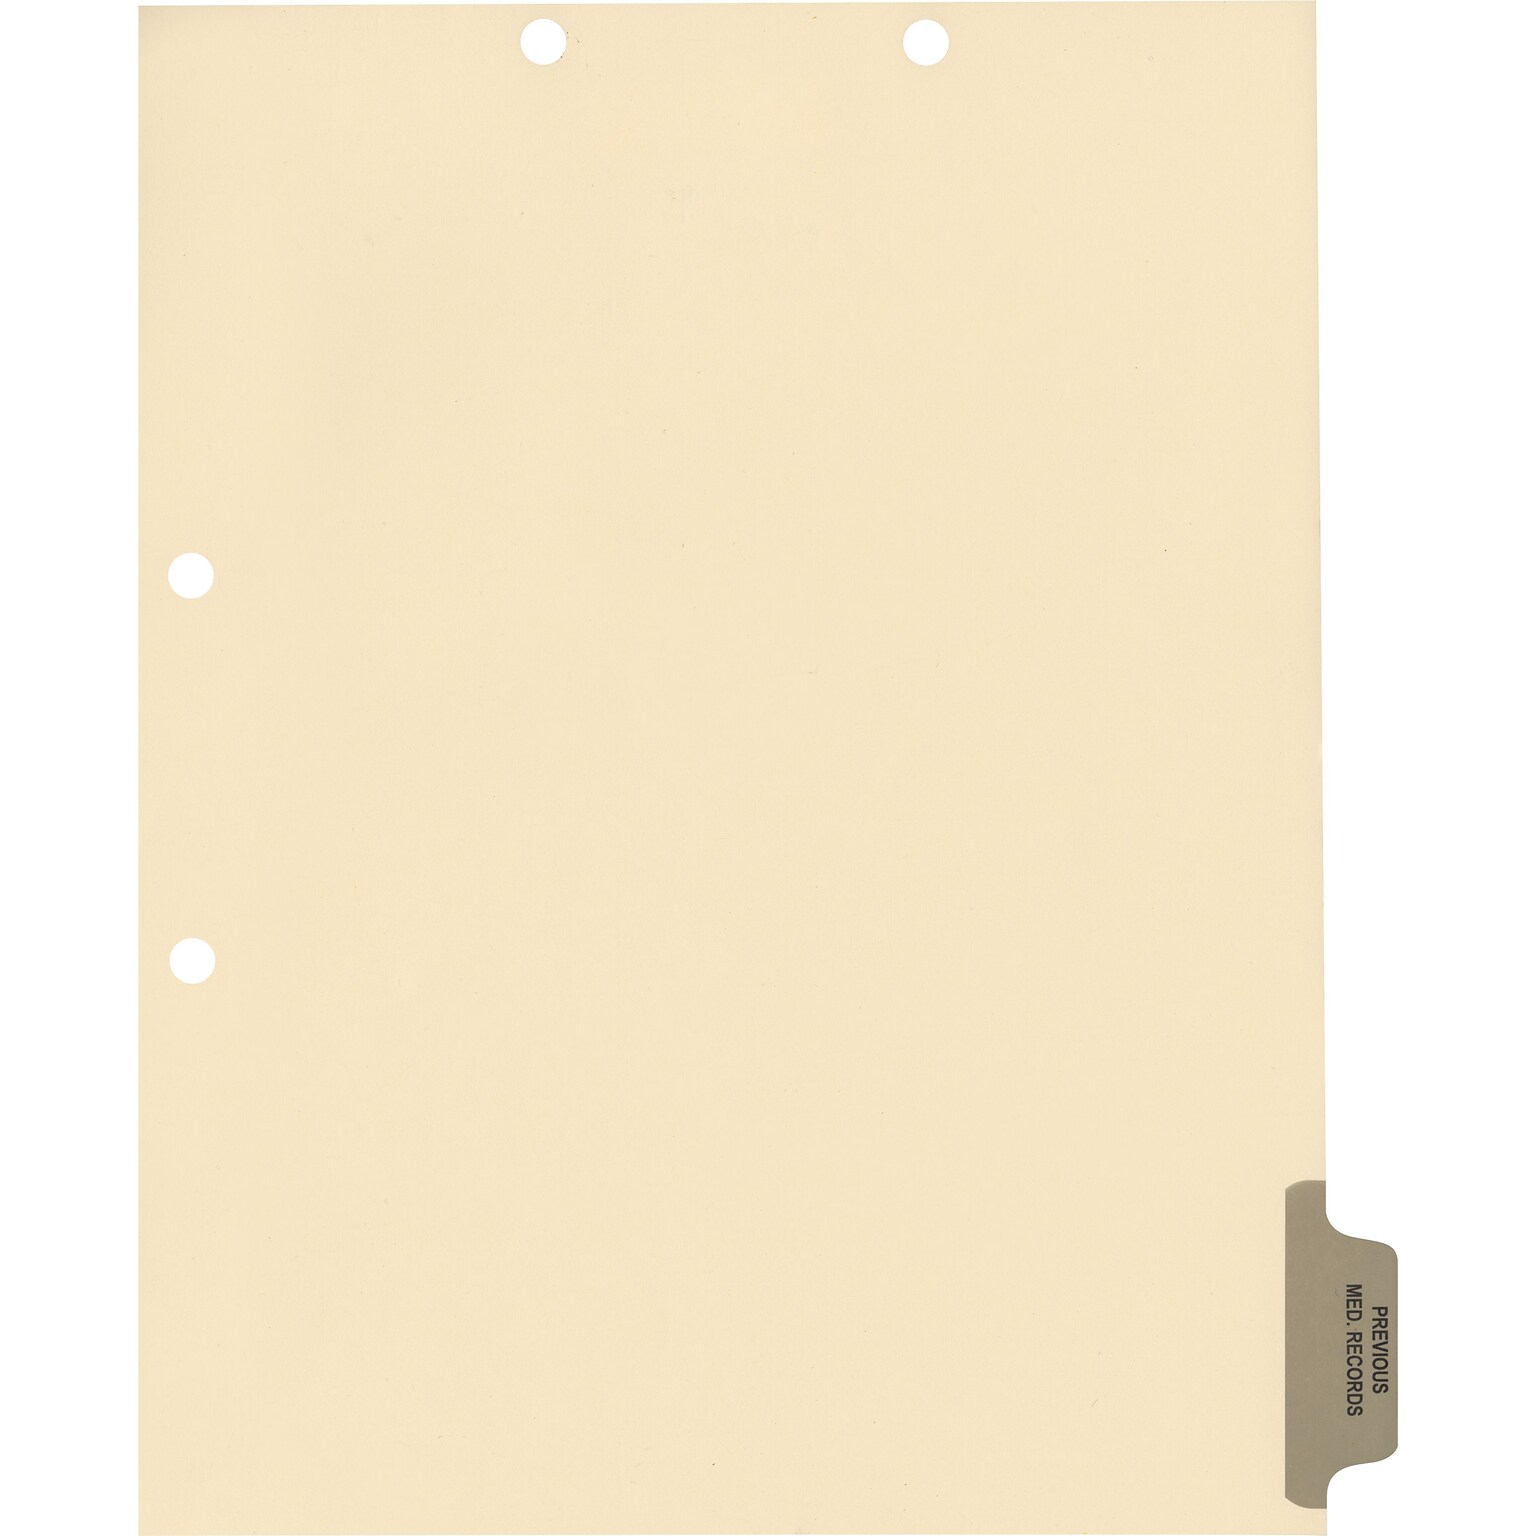 Medical Arts Press® Position 6 Colored Side-Tab Chart Dividers, Previous Medical Records, Gray